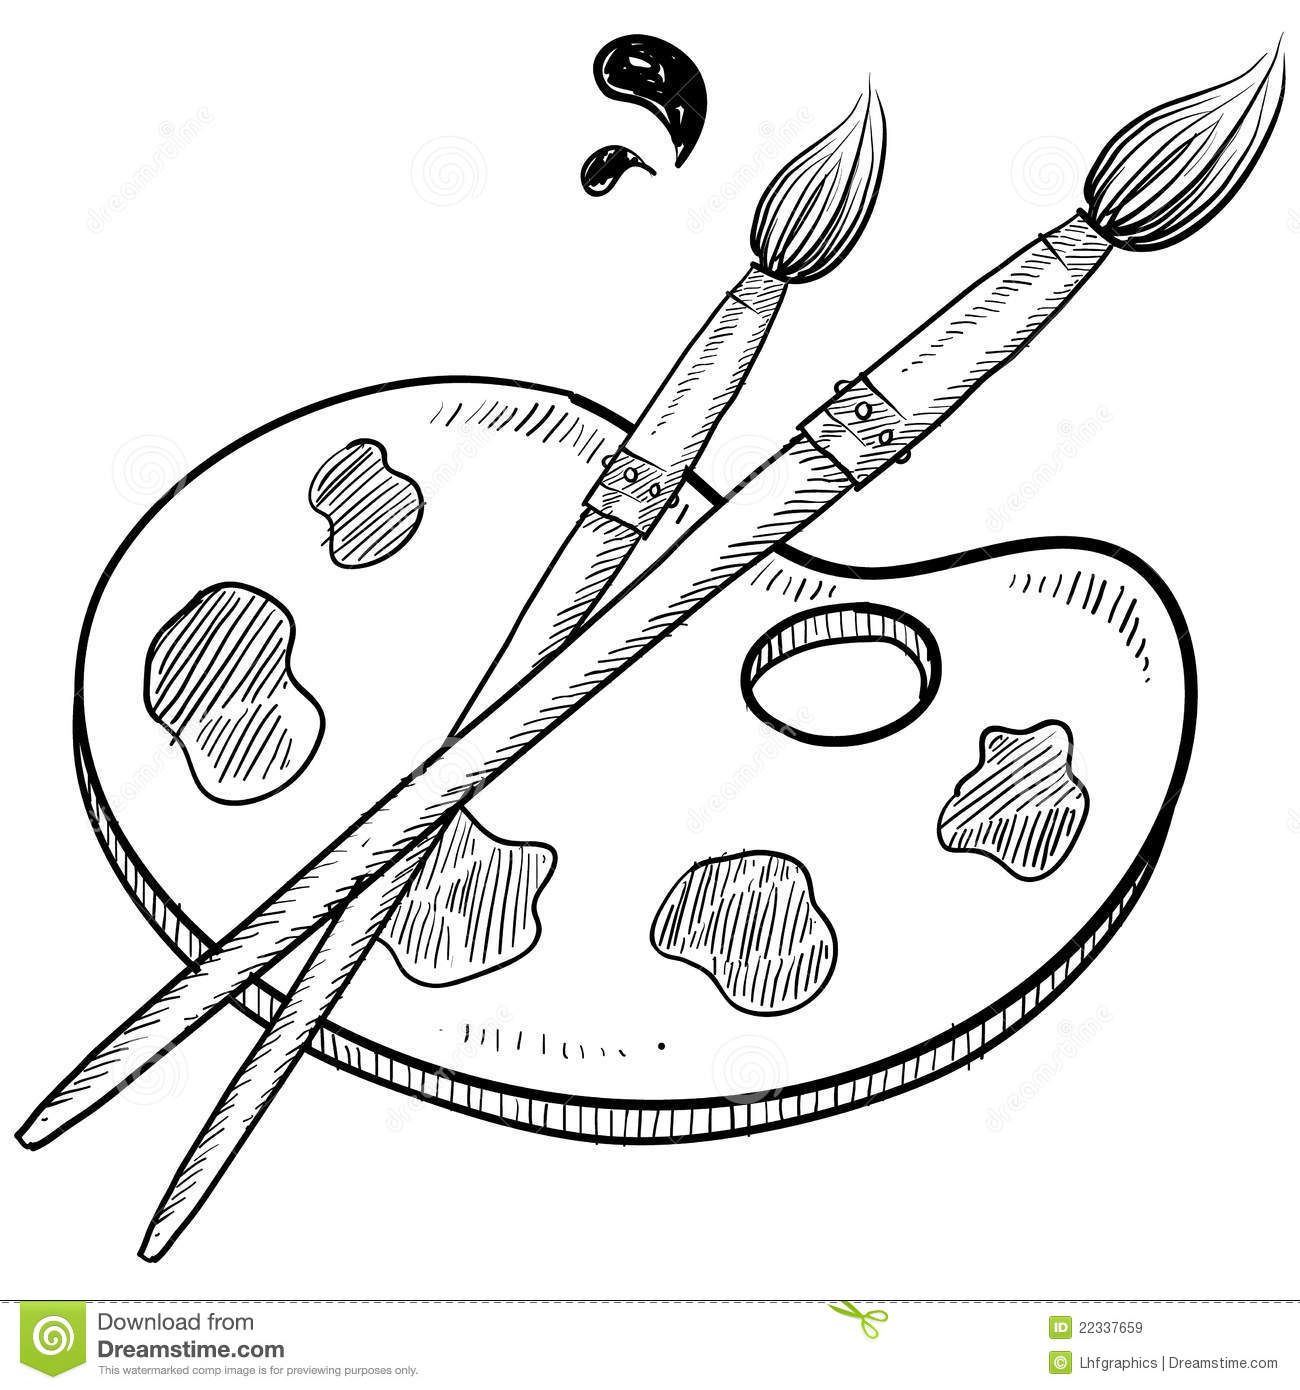 Paintbrush clipart black and white